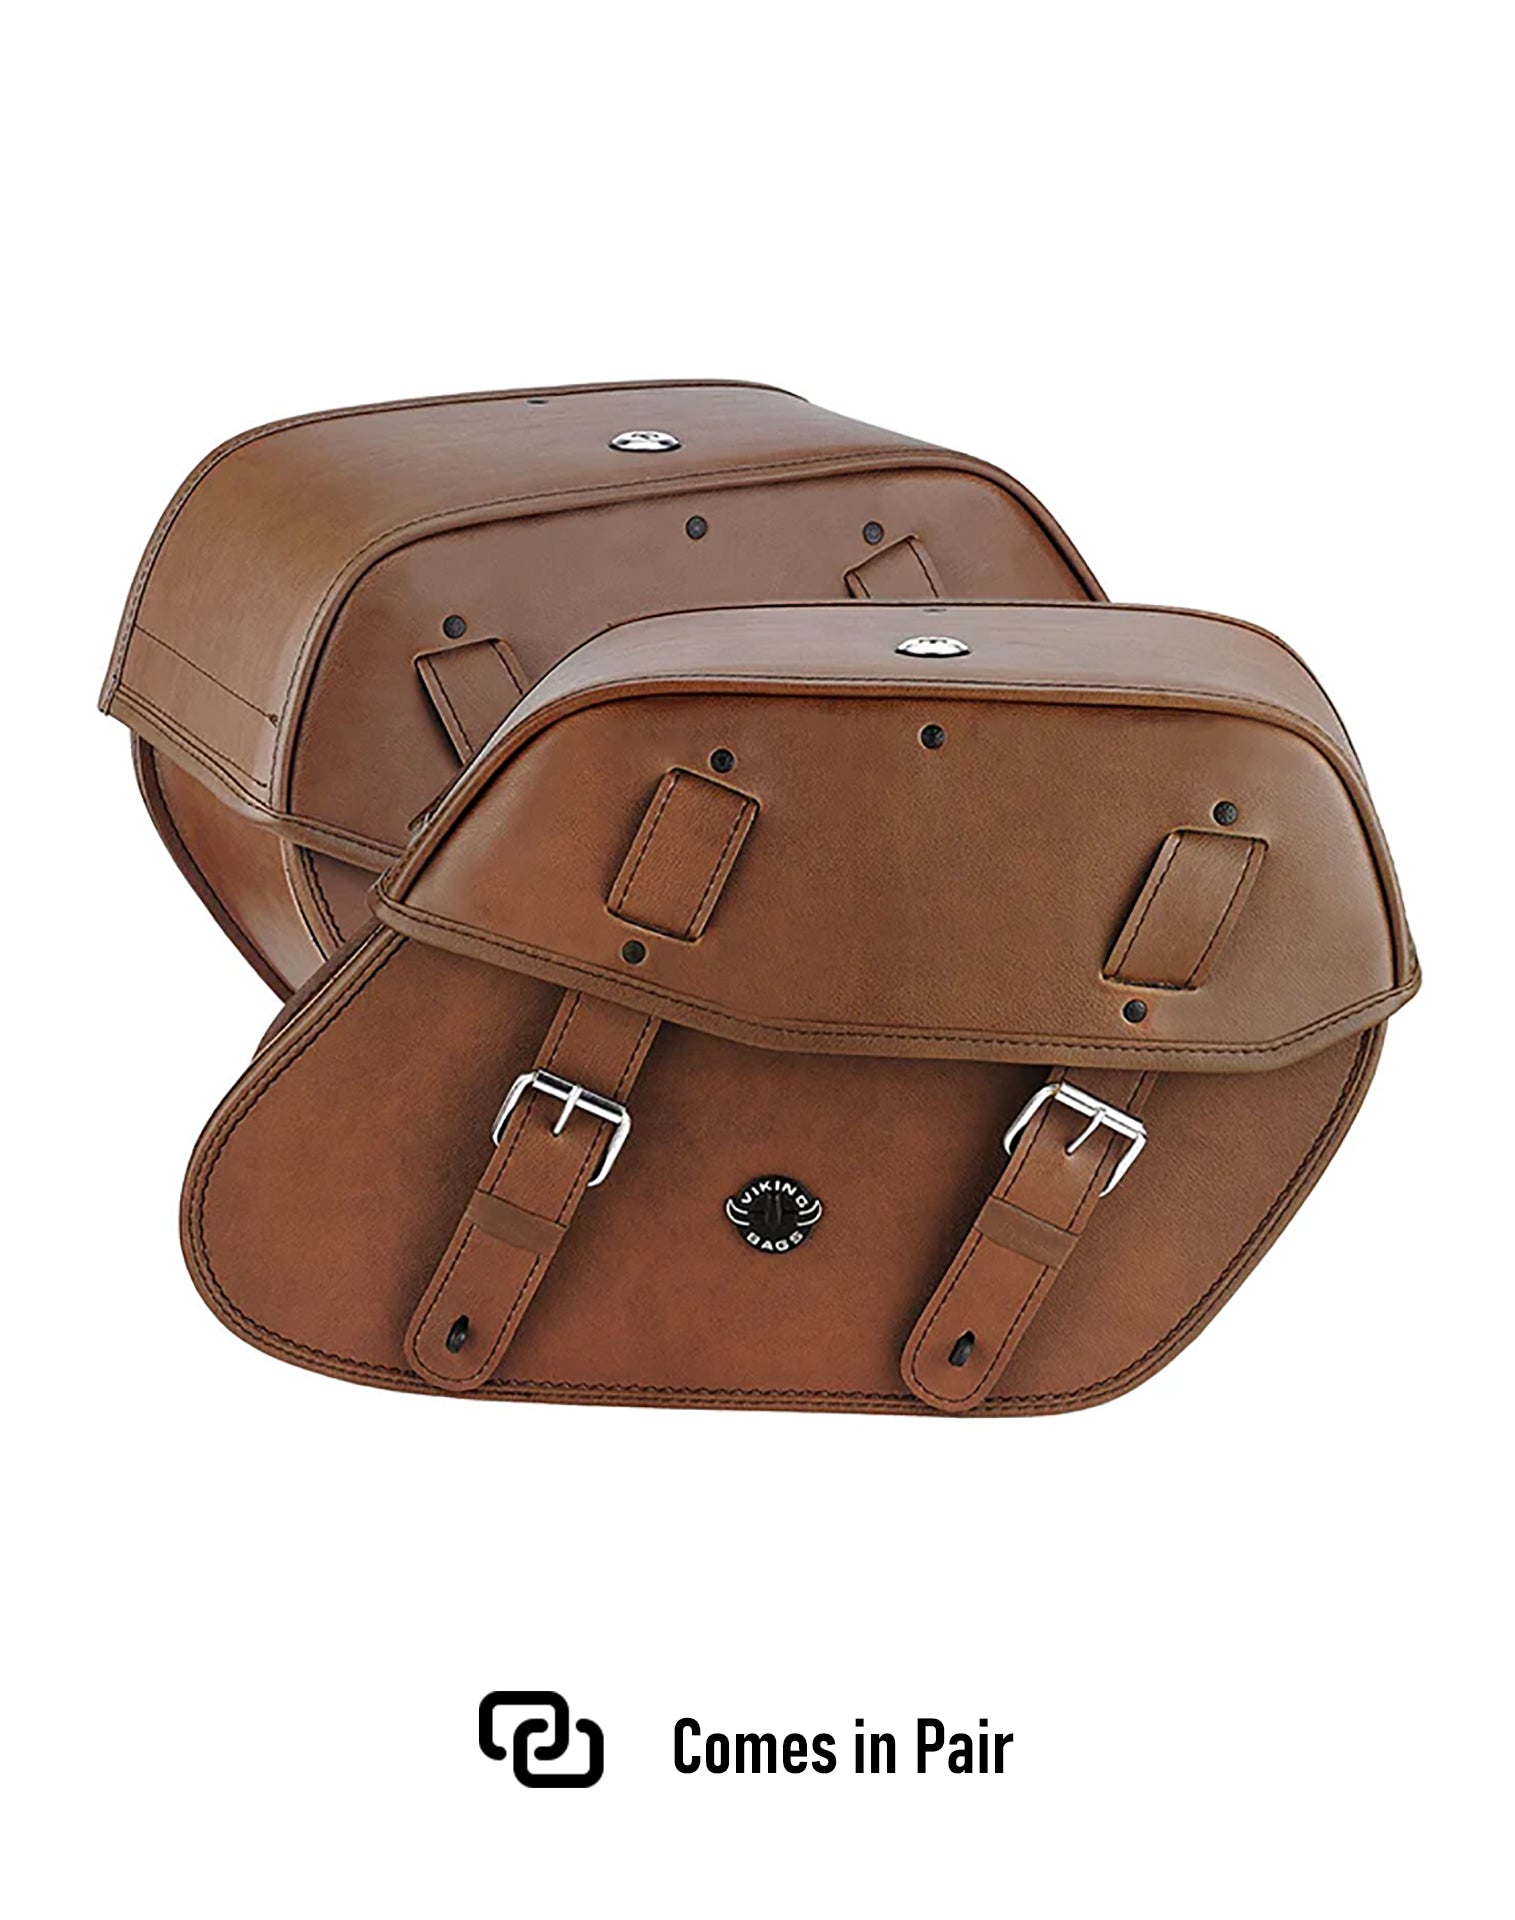 Viking Odin Brown Large Victory Kingpin Leather Motorcycle Saddlebags Weather Resistant Bags Comes in Pair